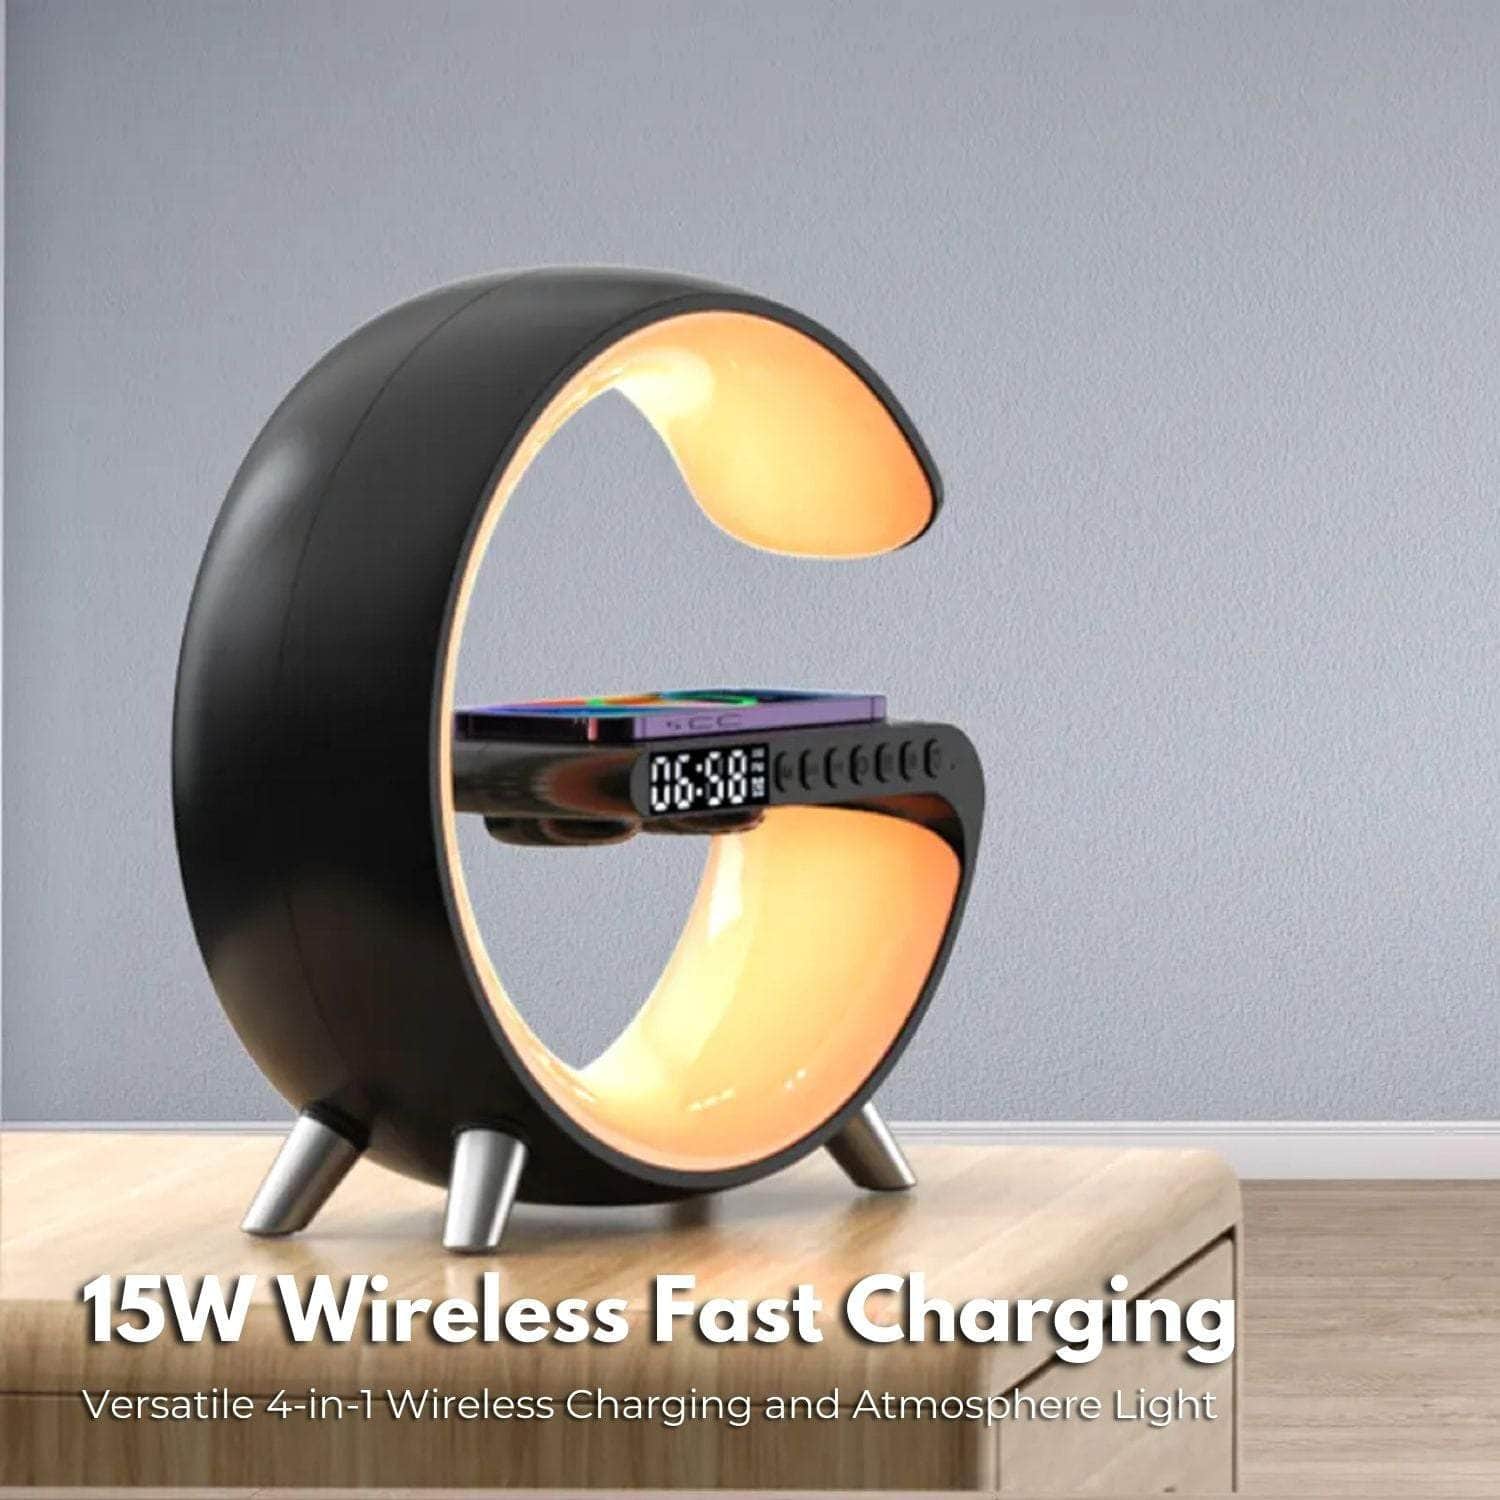 5 In 1 Bedside Table Lamp With 15W Quick Wireless Charger (Black)